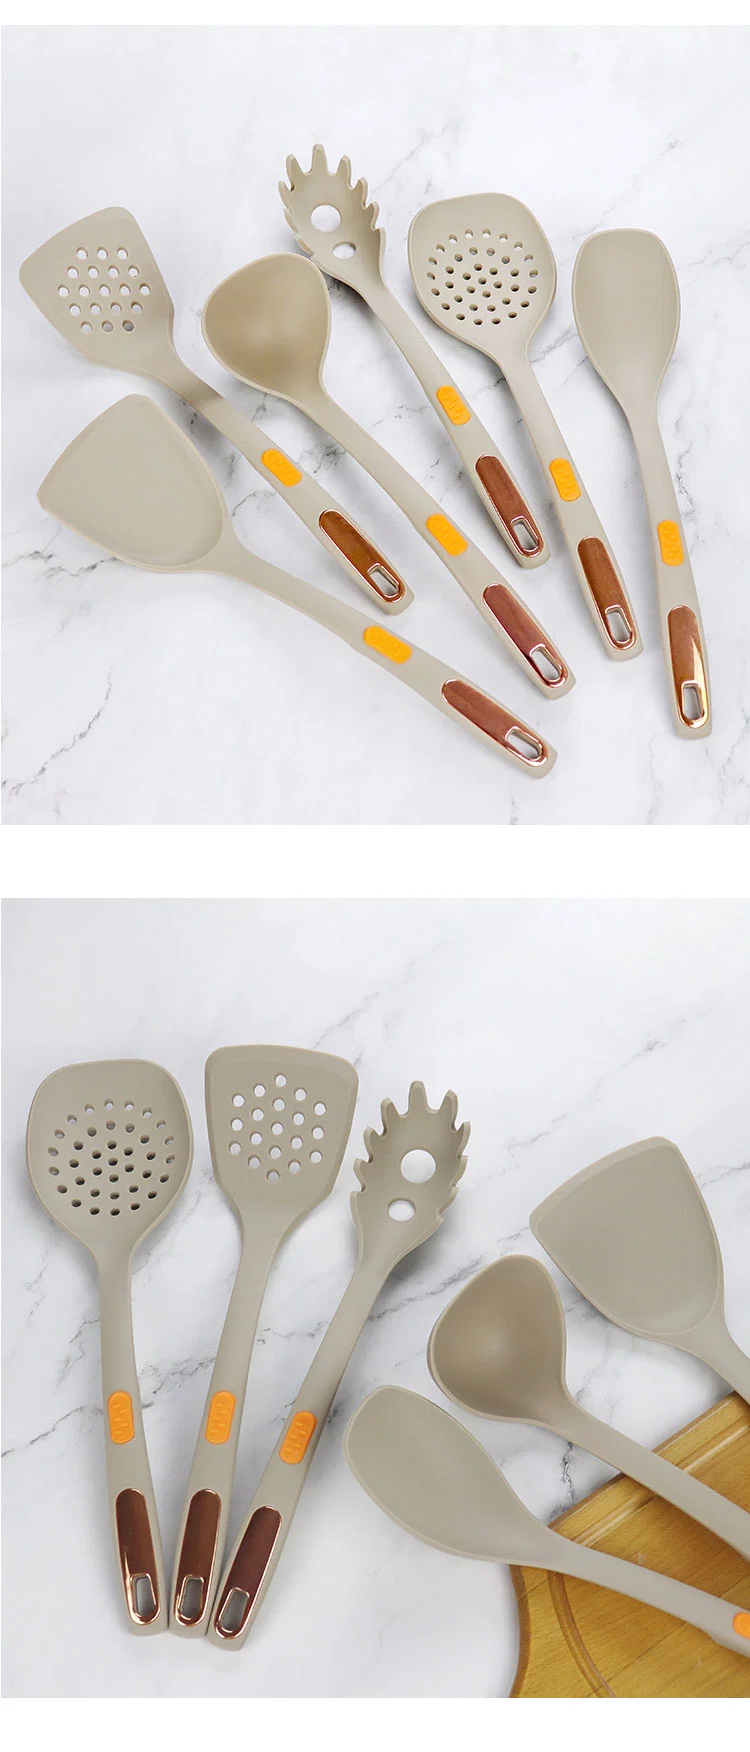 Silicone Kitchen Cooking Set for Nonstick Utensils